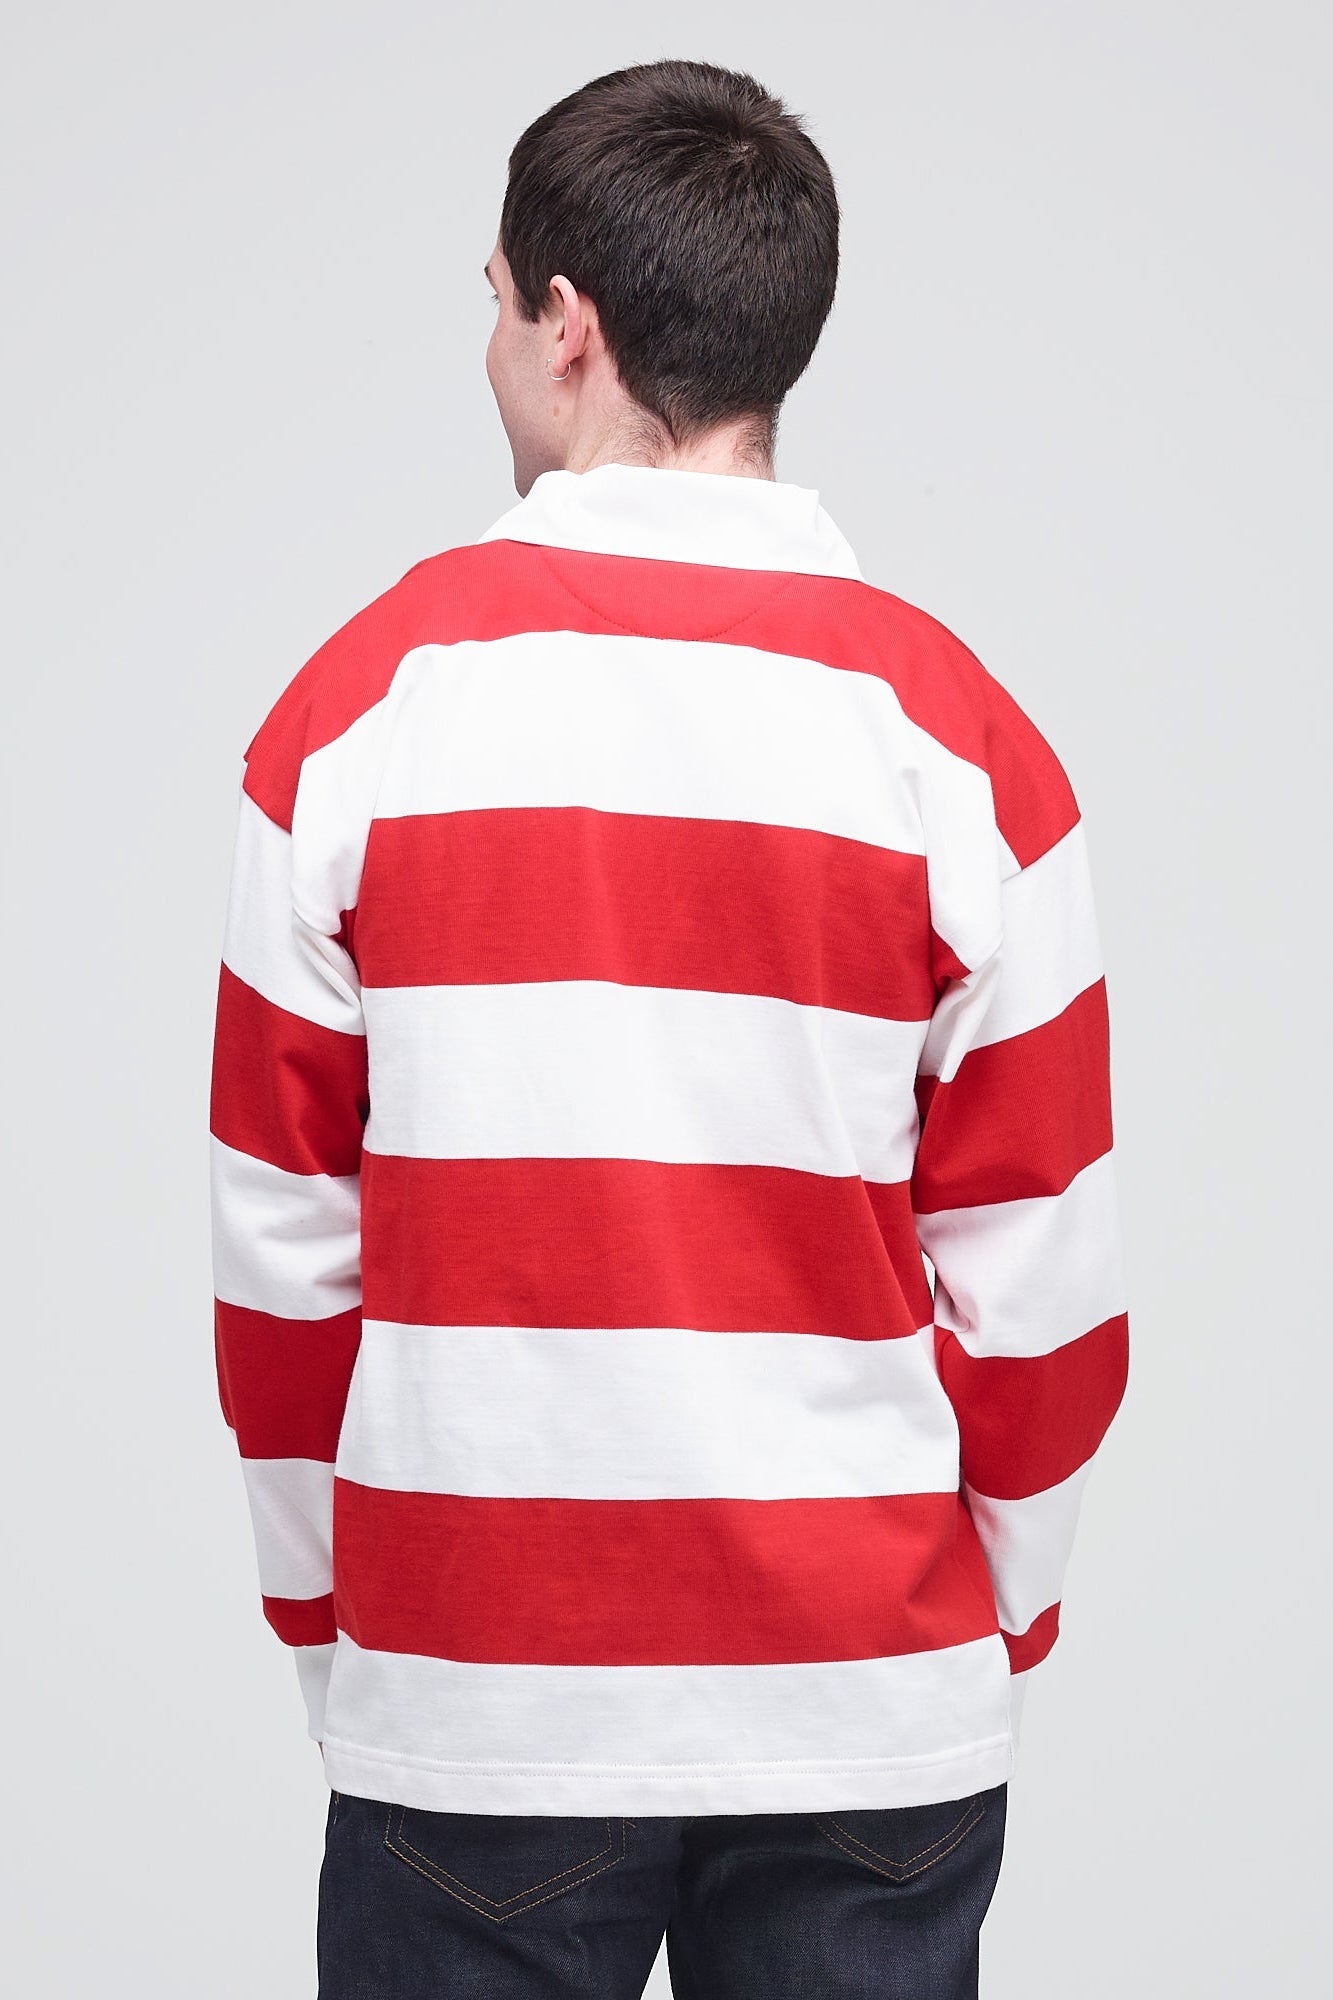 Male_Wide-Stripped-Rugby-Shirt_Red-White_Back